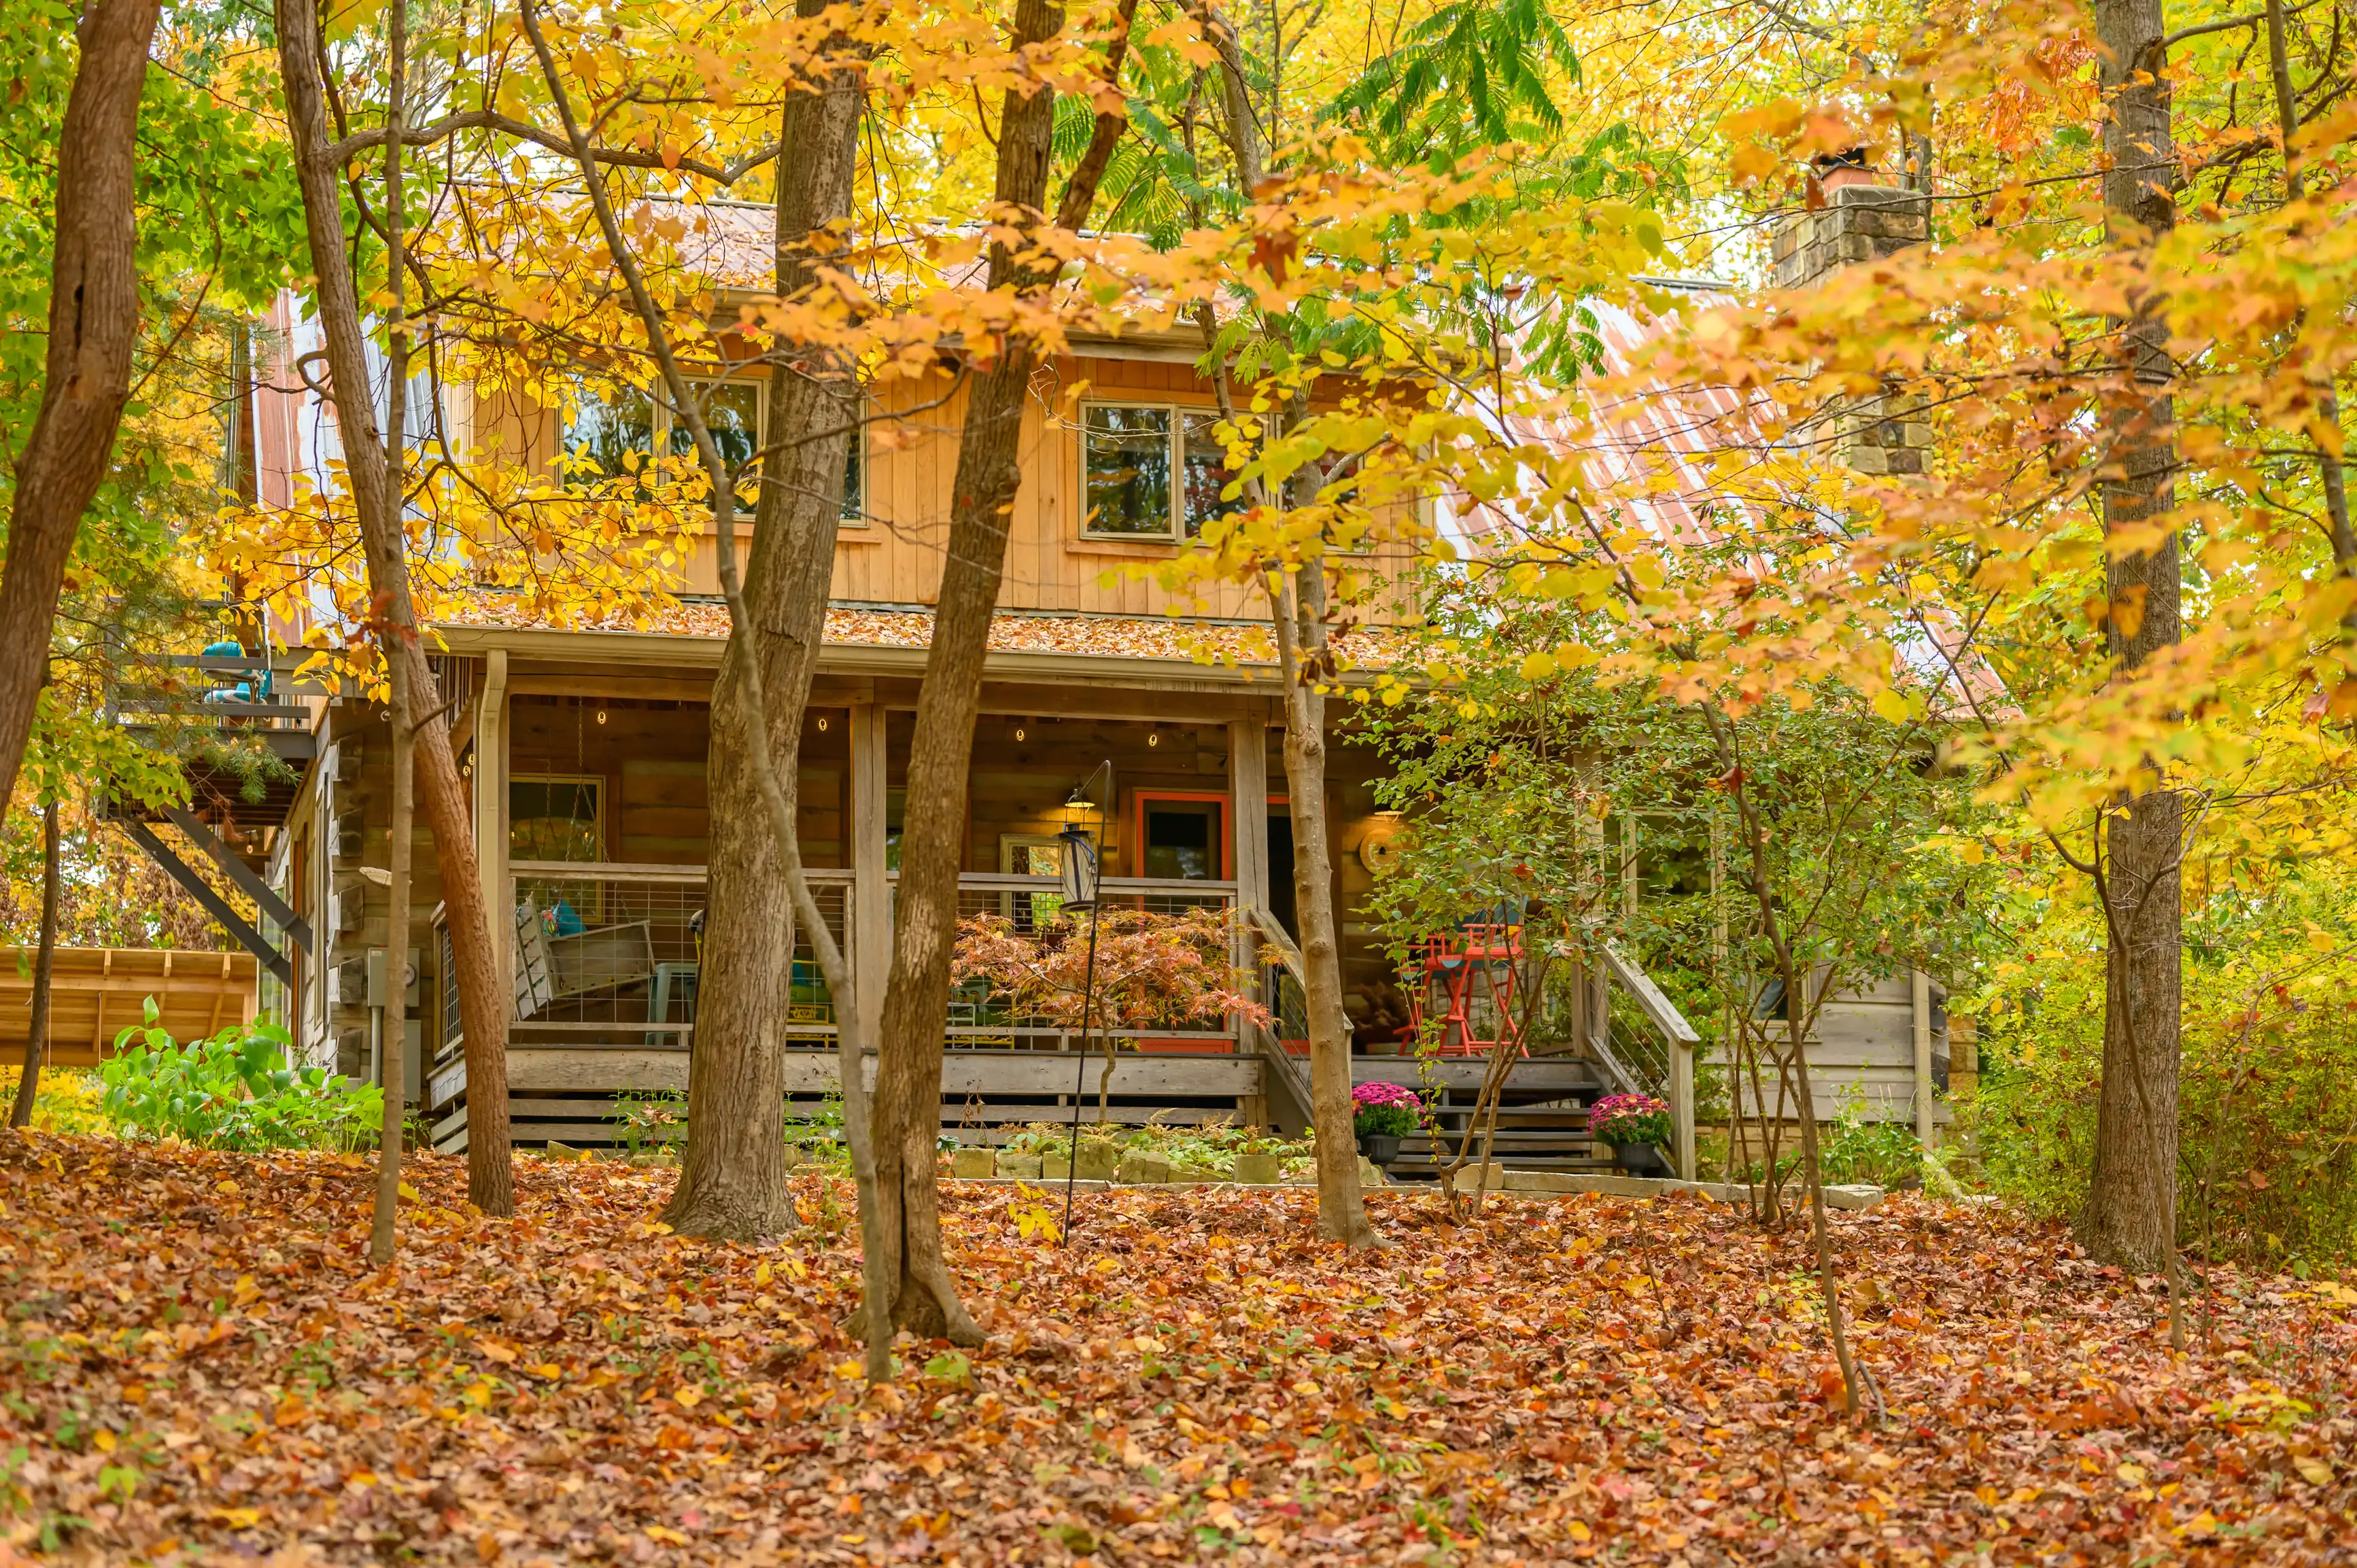 A cozy wooden house with a front porch surrounded by trees with autumn-colored leaves and a ground covered in fallen leaves.